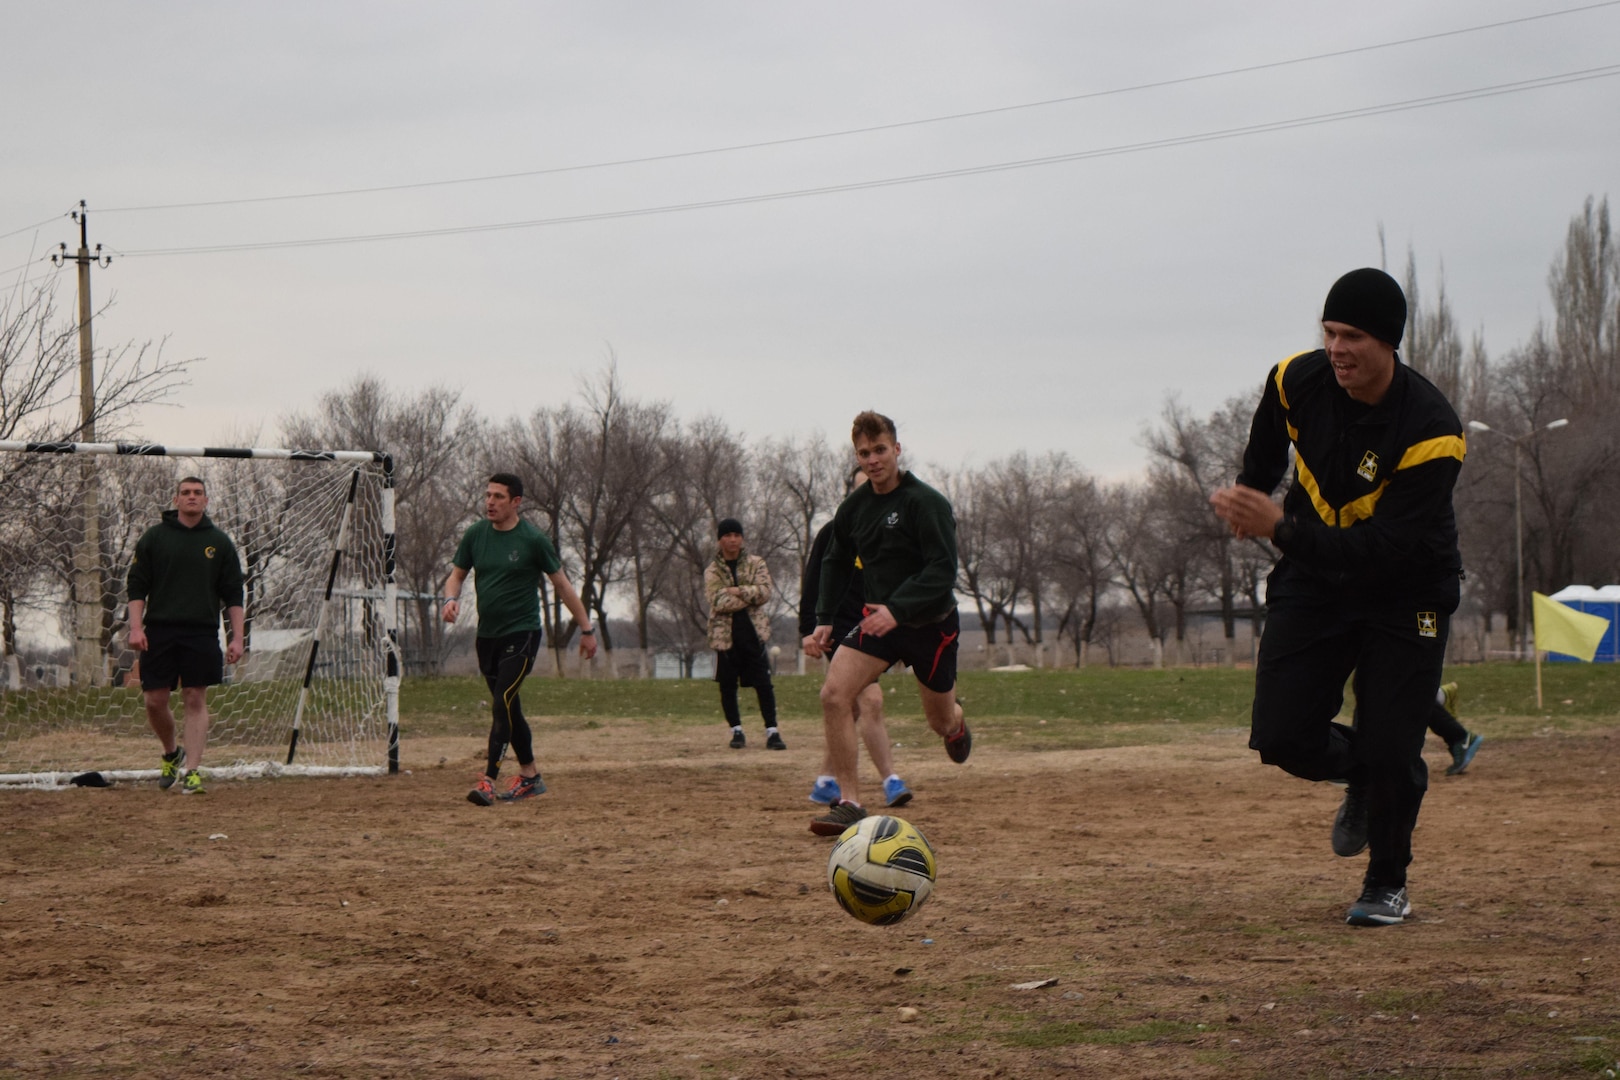 An Arizona National Guard Soldier races for the ball during a game of soccer against the U.K. soldiers with 1st Battalion, The Rifles, 160 Brigade, Apr. 2, 2017, at Illisky Training Center, Kazakhstan. The soldiers are participating in Steppe Eagle Koktem, phase one of the multinational Steppe Eagle Exercise.